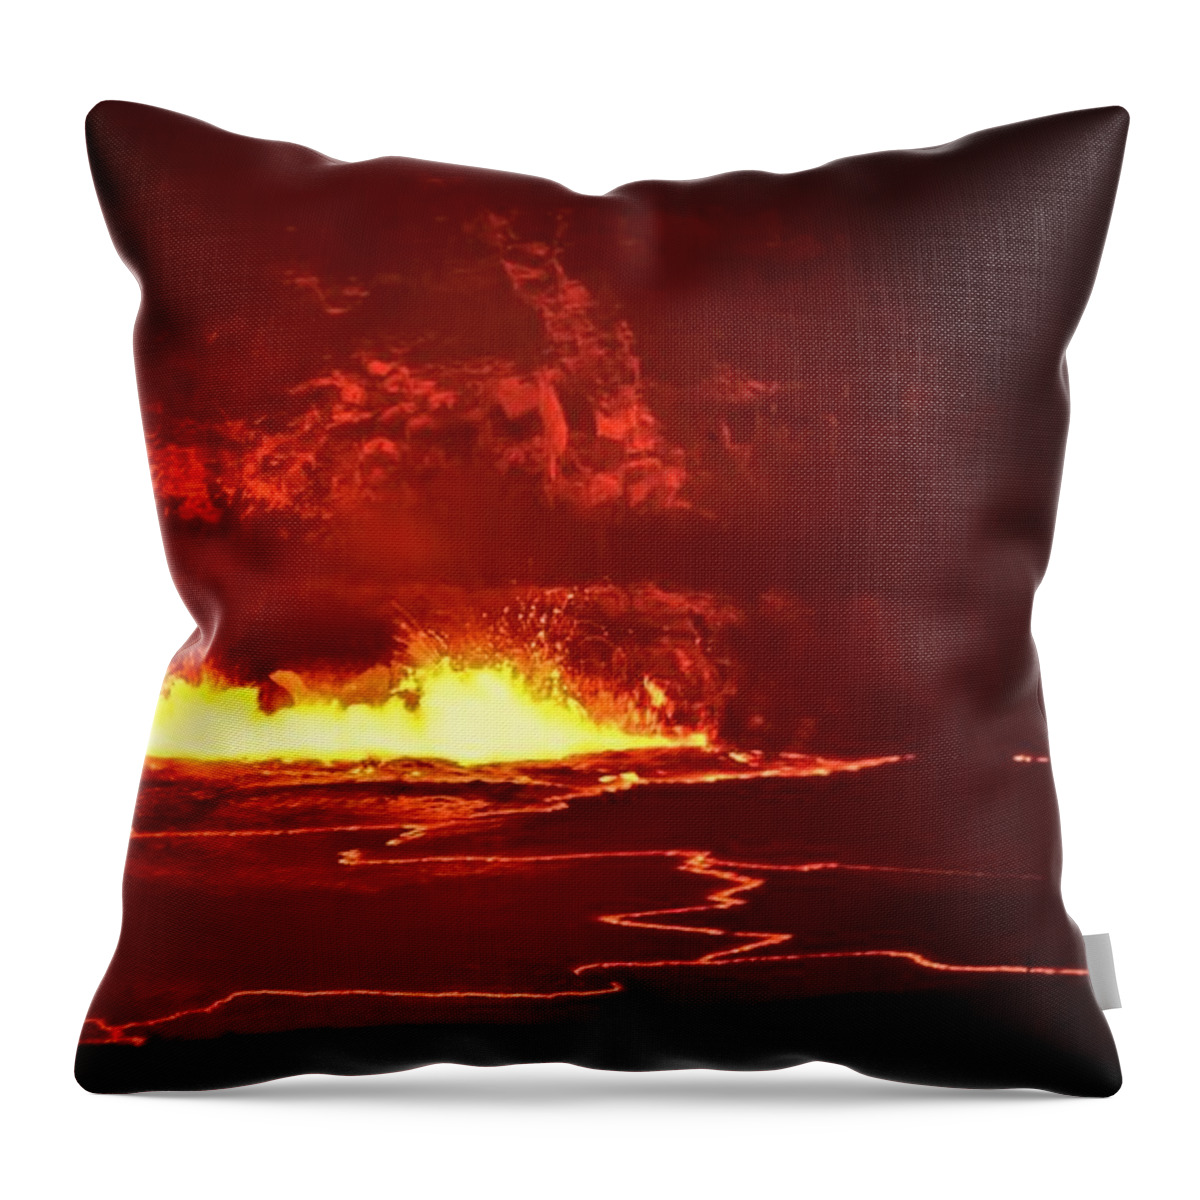 Lava Lake Throw Pillow featuring the photograph Lava Lake by Heidi Fickinger